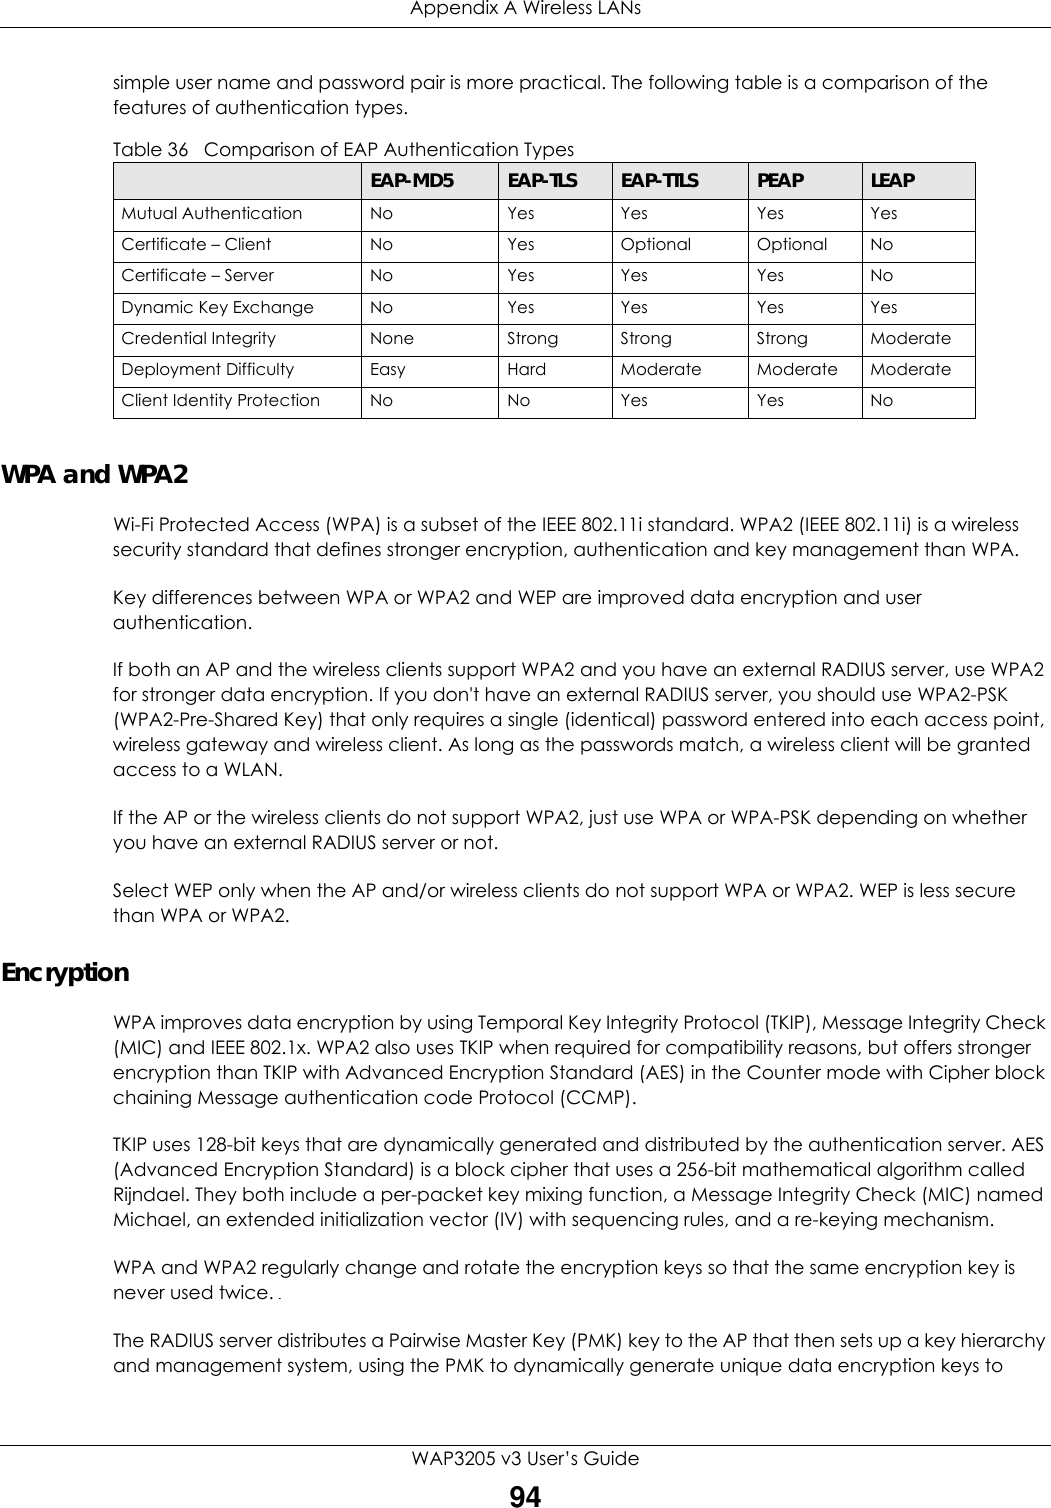 Appendix A Wireless LANsWAP3205 v3 User’s Guide94simple user name and password pair is more practical. The following table is a comparison of the features of authentication types.WPA and WPA2Wi-Fi Protected Access (WPA) is a subset of the IEEE 802.11i standard. WPA2 (IEEE 802.11i) is a wireless security standard that defines stronger encryption, authentication and key management than WPA. Key differences between WPA or WPA2 and WEP are improved data encryption and user authentication.If both an AP and the wireless clients support WPA2 and you have an external RADIUS server, use WPA2 for stronger data encryption. If you don&apos;t have an external RADIUS server, you should use WPA2-PSK (WPA2-Pre-Shared Key) that only requires a single (identical) password entered into each access point, wireless gateway and wireless client. As long as the passwords match, a wireless client will be granted access to a WLAN. If the AP or the wireless clients do not support WPA2, just use WPA or WPA-PSK depending on whether you have an external RADIUS server or not.Select WEP only when the AP and/or wireless clients do not support WPA or WPA2. WEP is less secure than WPA or WPA2.Encryption WPA improves data encryption by using Temporal Key Integrity Protocol (TKIP), Message Integrity Check (MIC) and IEEE 802.1x. WPA2 also uses TKIP when required for compatibility reasons, but offers stronger encryption than TKIP with Advanced Encryption Standard (AES) in the Counter mode with Cipher block chaining Message authentication code Protocol (CCMP).TKIP uses 128-bit keys that are dynamically generated and distributed by the authentication server. AES (Advanced Encryption Standard) is a block cipher that uses a 256-bit mathematical algorithm called Rijndael. They both include a per-packet key mixing function, a Message Integrity Check (MIC) named Michael, an extended initialization vector (IV) with sequencing rules, and a re-keying mechanism.WPA and WPA2 regularly change and rotate the encryption keys so that the same encryption key is never used twice. The RADIUS server distributes a Pairwise Master Key (PMK) key to the AP that then sets up a key hierarchy and management system, using the PMK to dynamically generate unique data encryption keys to Table 36   Comparison of EAP Authentication TypesEAP-MD5 EAP-TLS EAP-TTLS PEAP LEAPMutual Authentication No Yes Yes Yes YesCertificate – Client No Yes Optional Optional NoCertificate – Server No Yes Yes Yes NoDynamic Key Exchange No Yes Yes Yes YesCredential Integrity None Strong Strong Strong ModerateDeployment Difficulty Easy Hard Moderate Moderate ModerateClient Identity Protection No No Yes Yes No